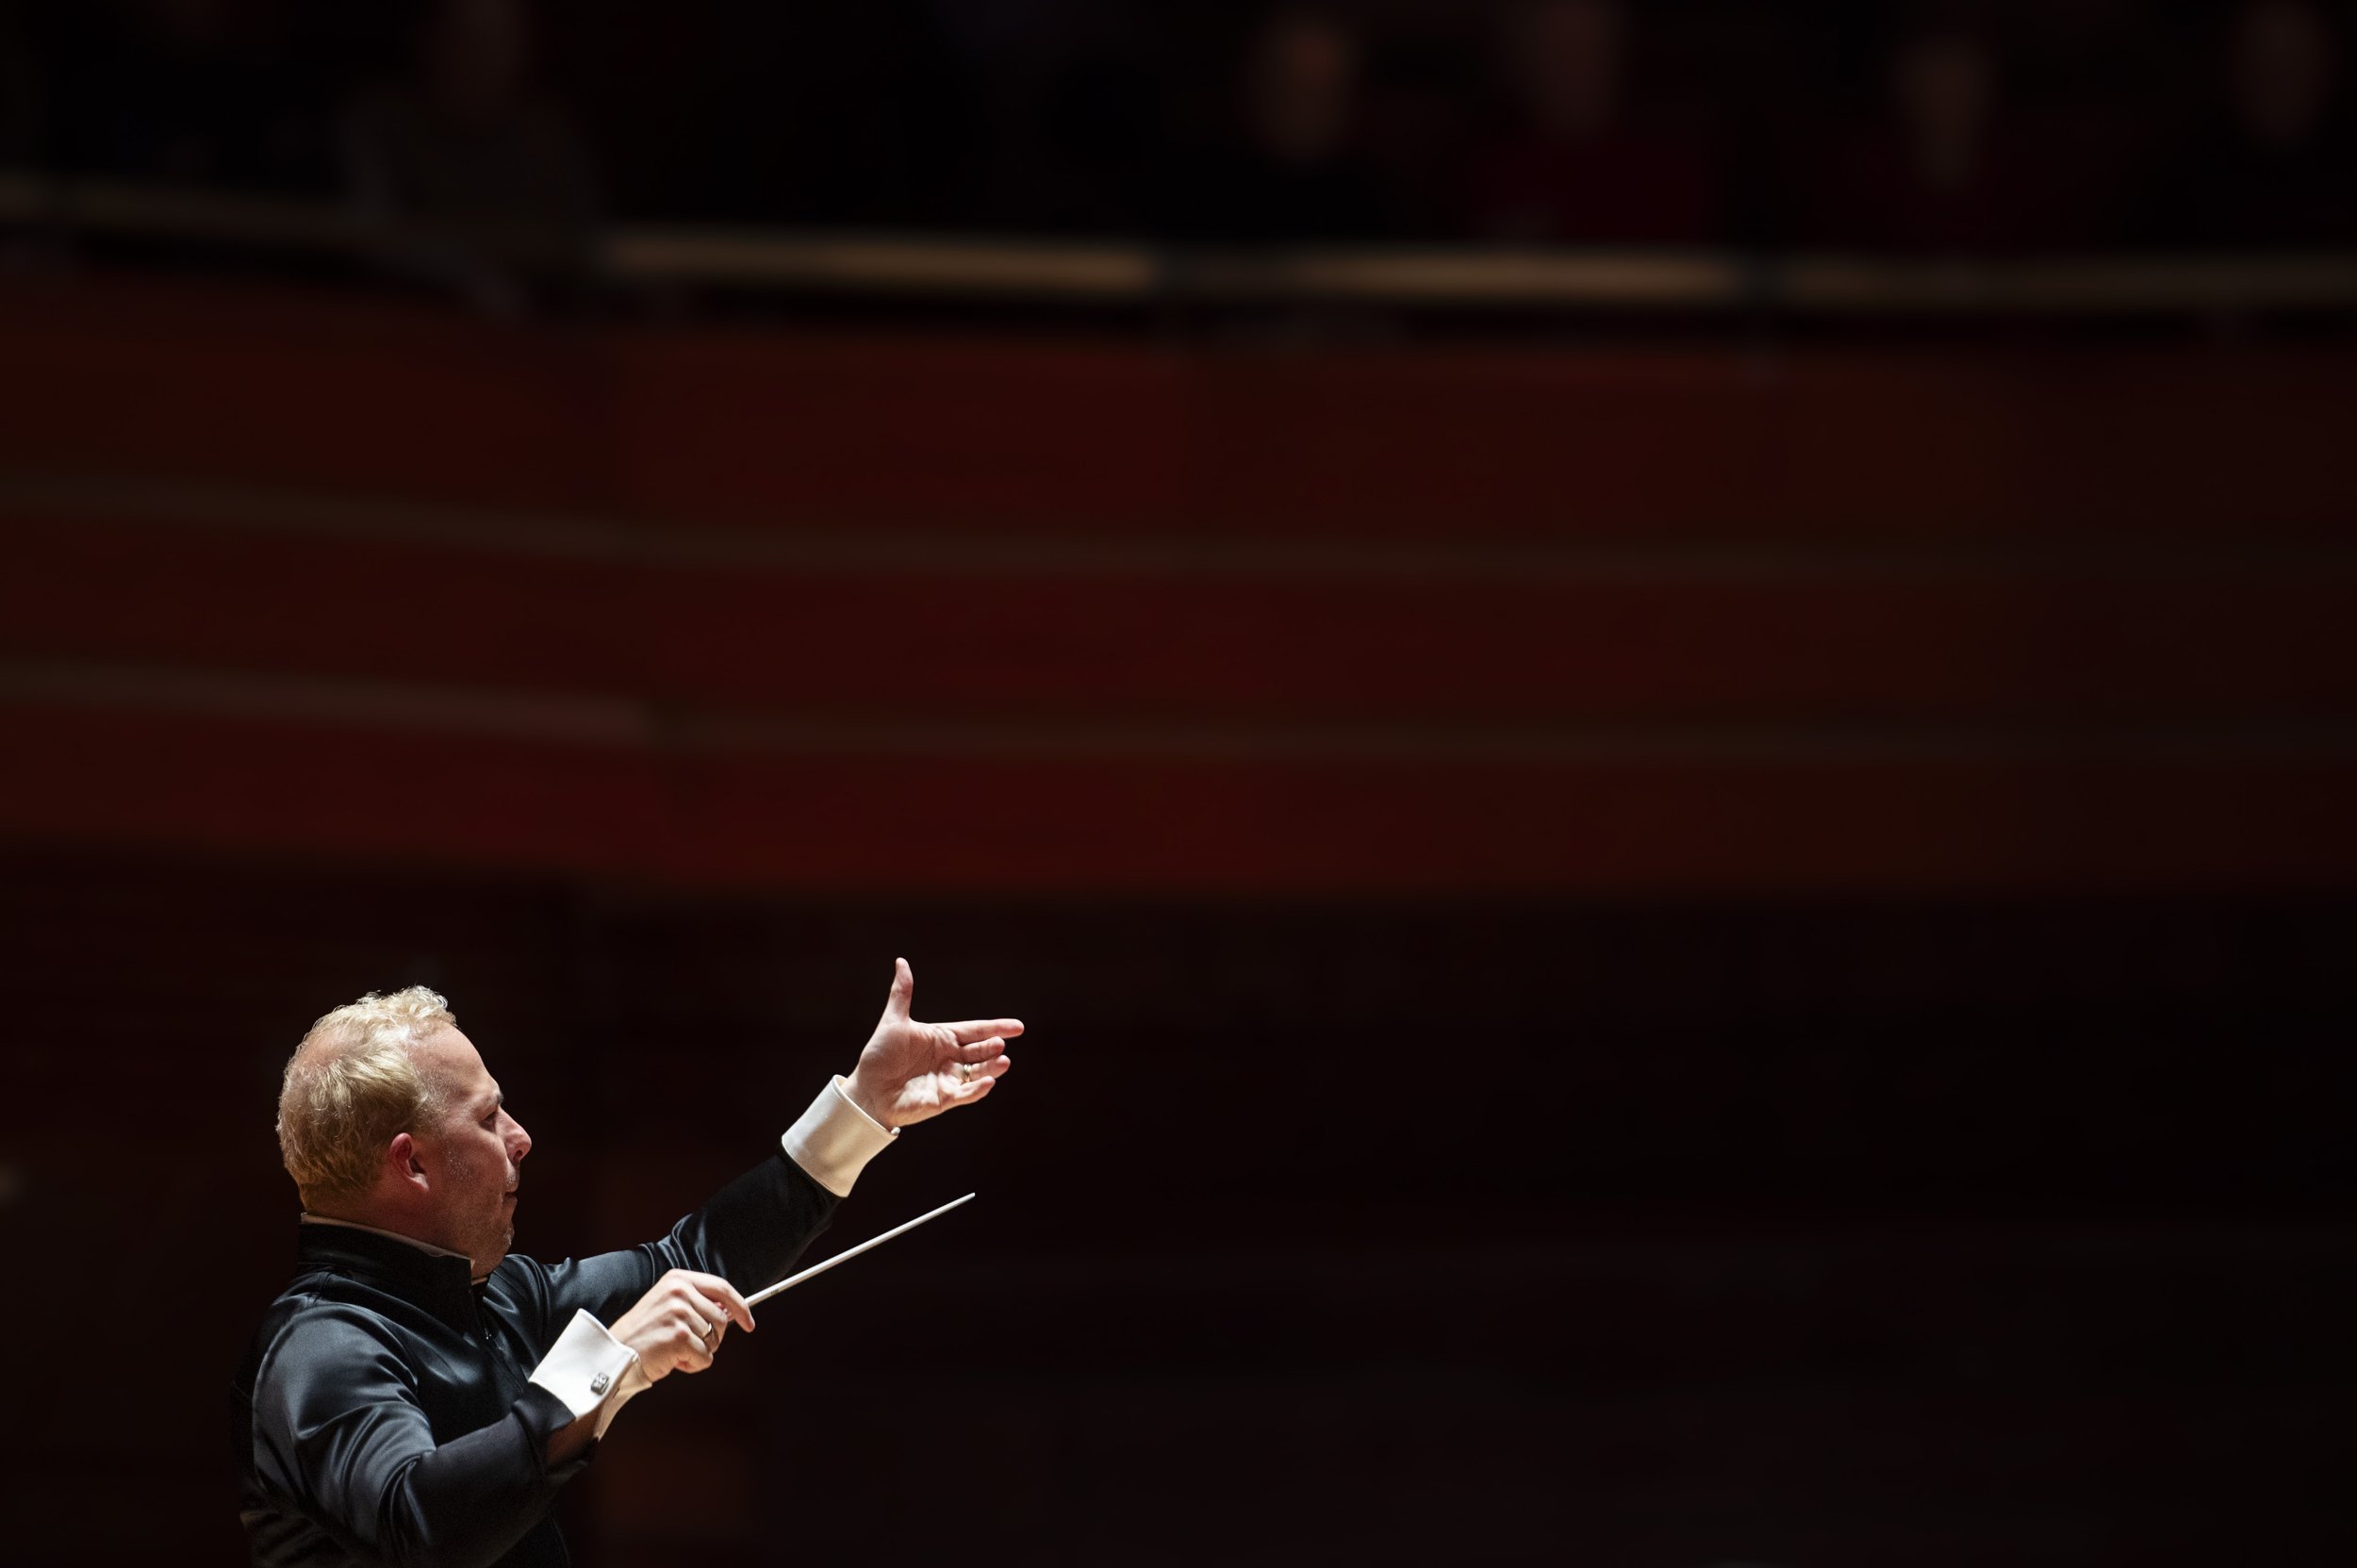   Philadelphia Orchestra conductor Yannick Nezet-Seguin performs with the Berlin Staatskapelle at the Kimmel Center to start their international orchestra series on Sunday, Dec. 3, 2023.  